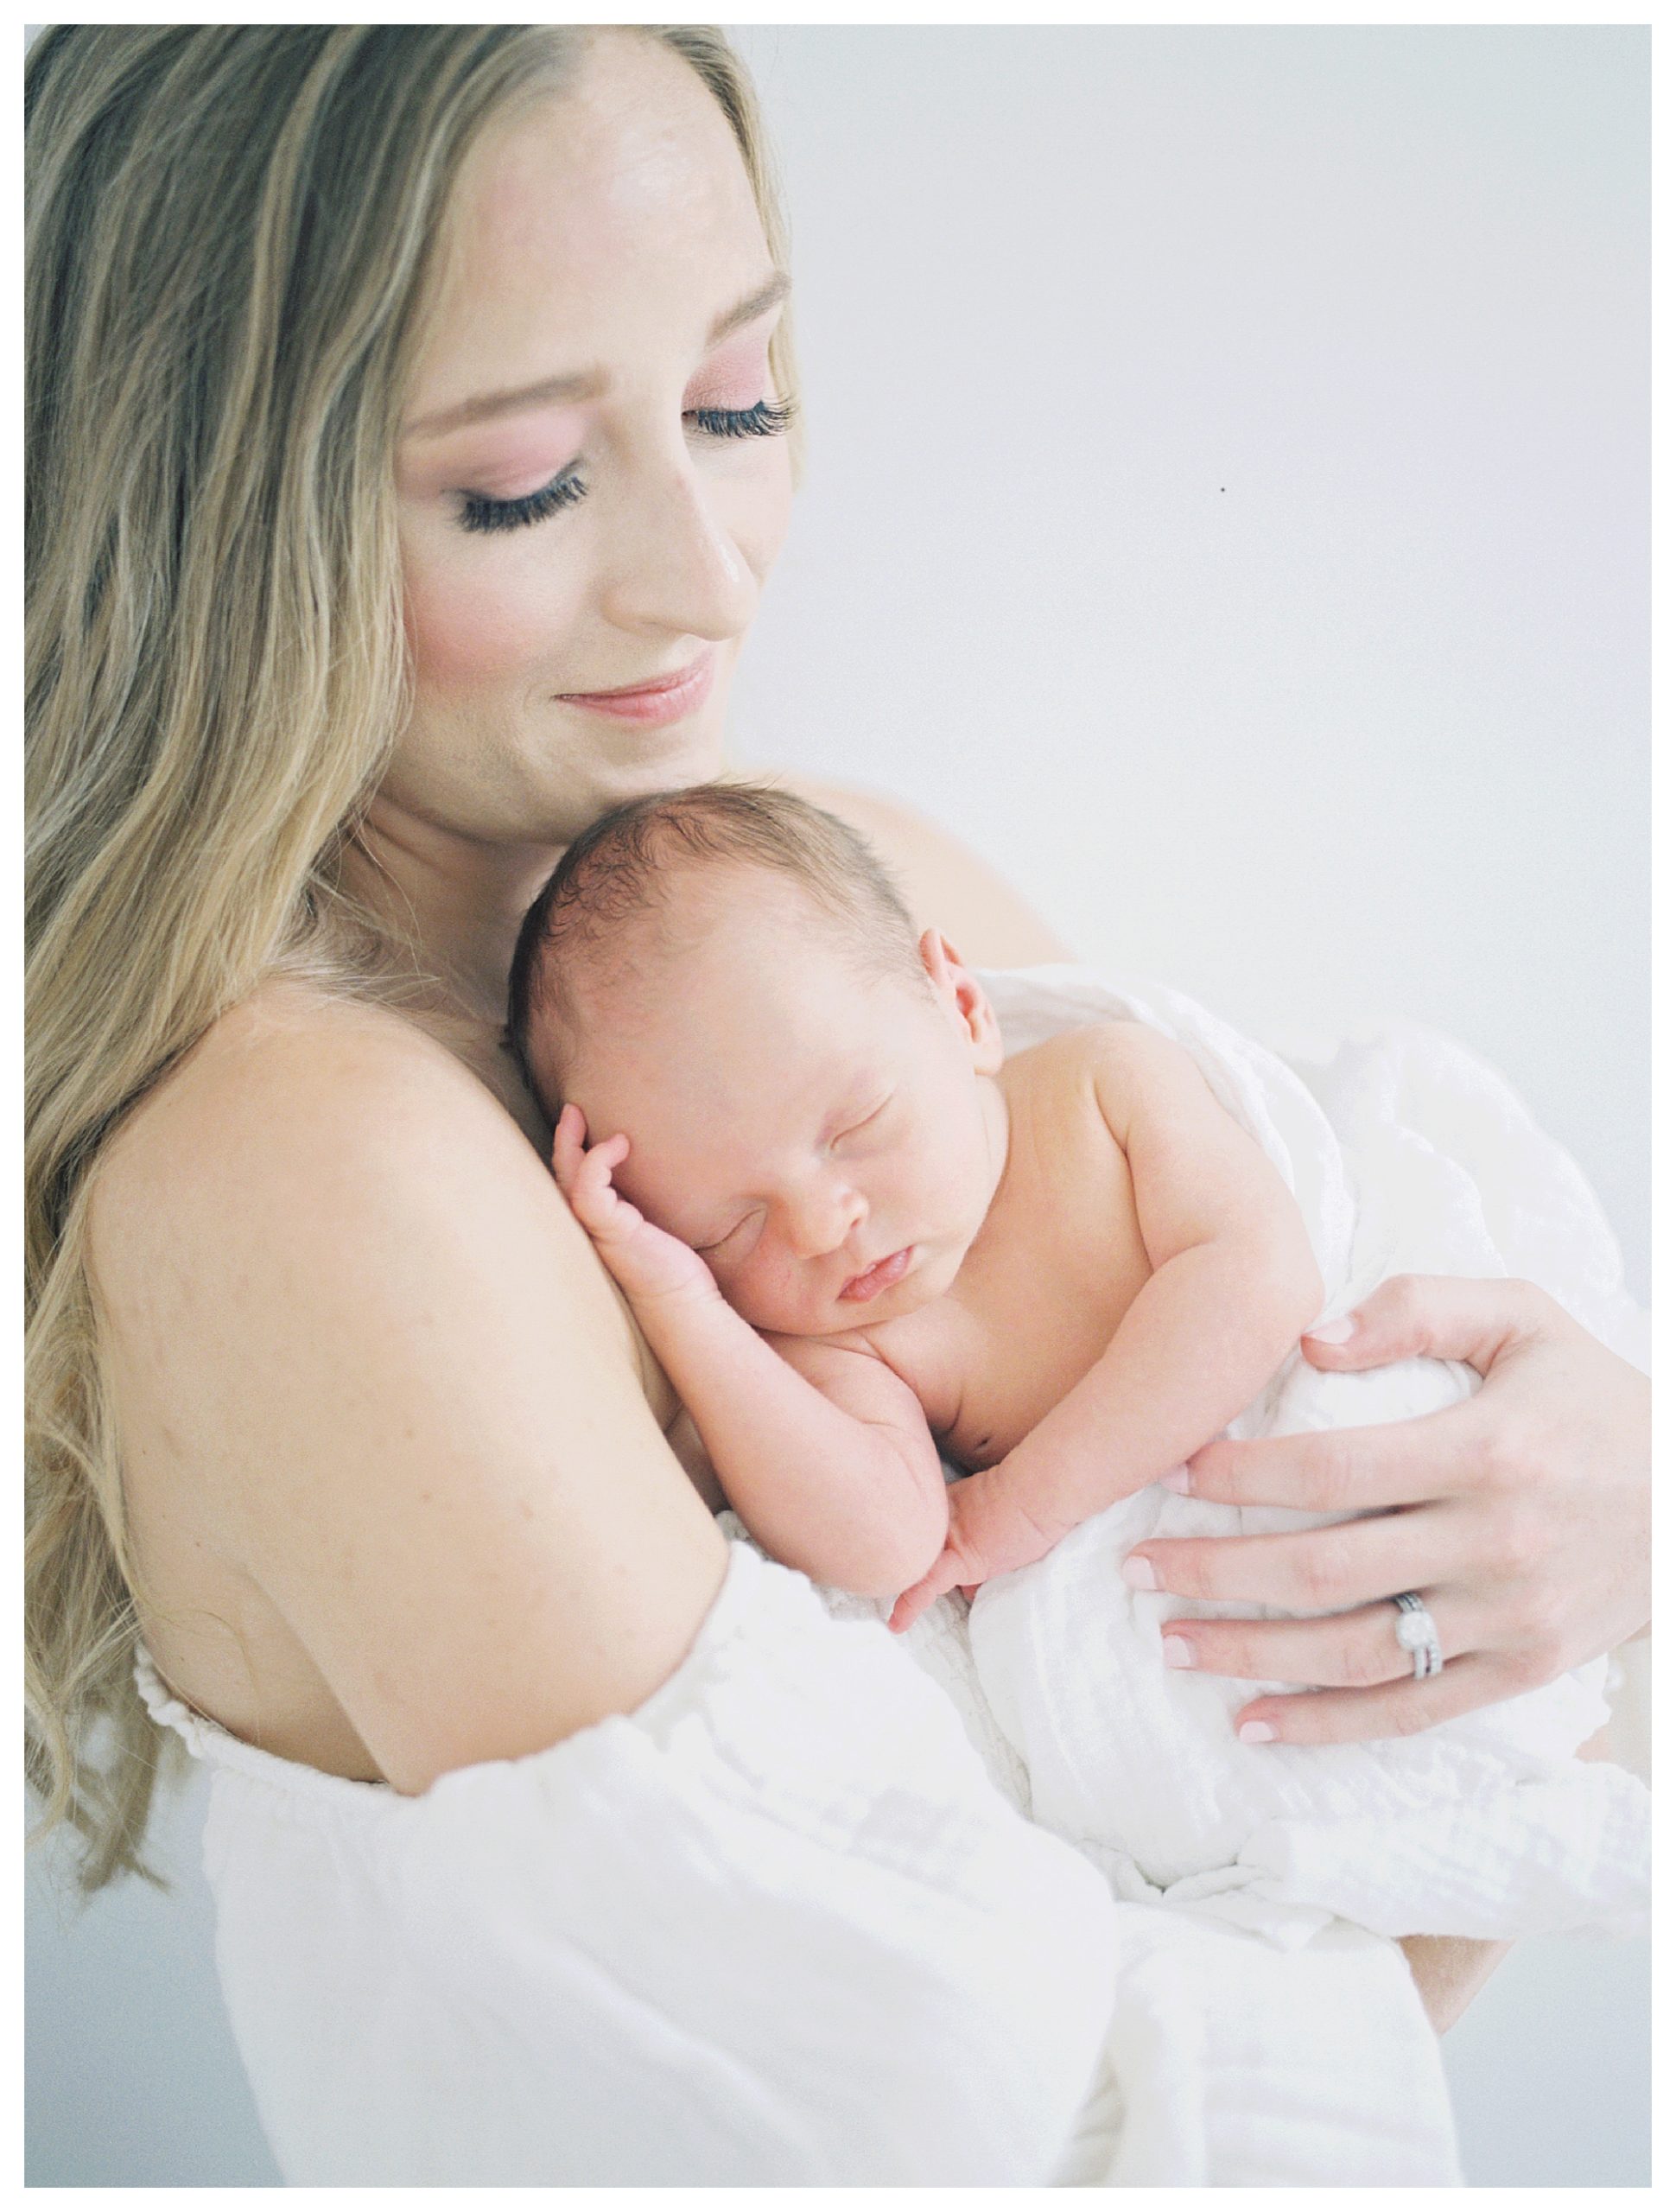 Blonde new mother in ivory dress holds newborn baby up to her chest during DC Newborn Session.